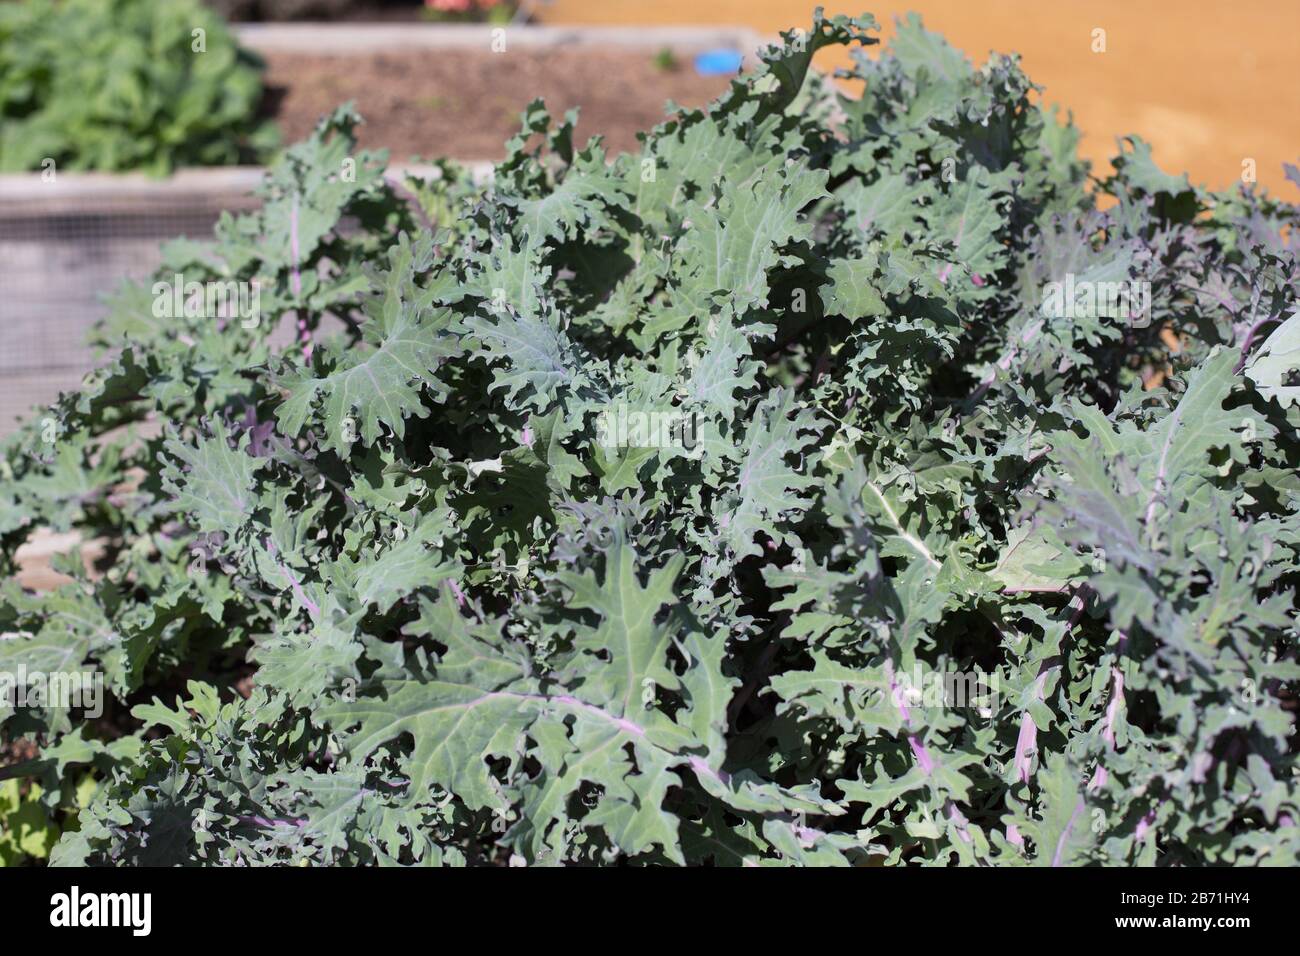 Kale 'Red Russian'. Stock Photo